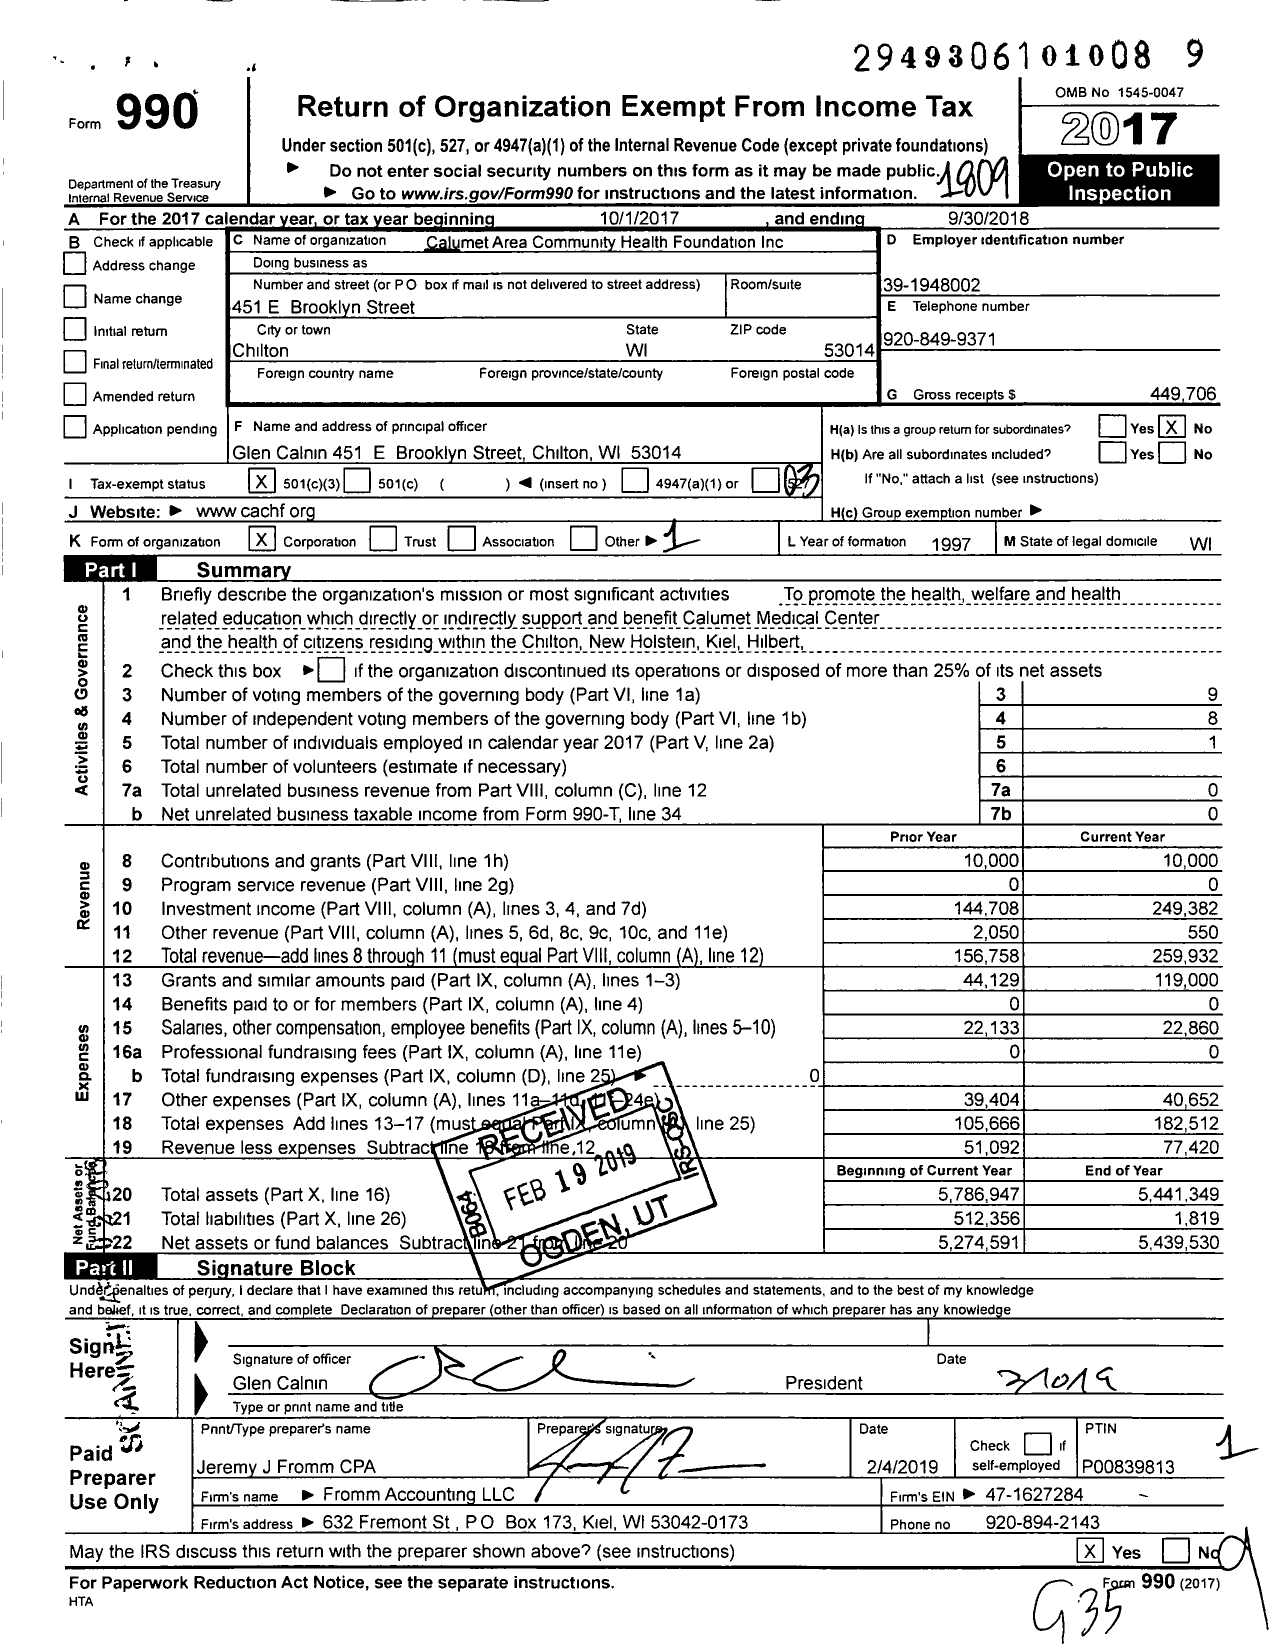 Image of first page of 2017 Form 990 for Calumet Area Community Health Foundation